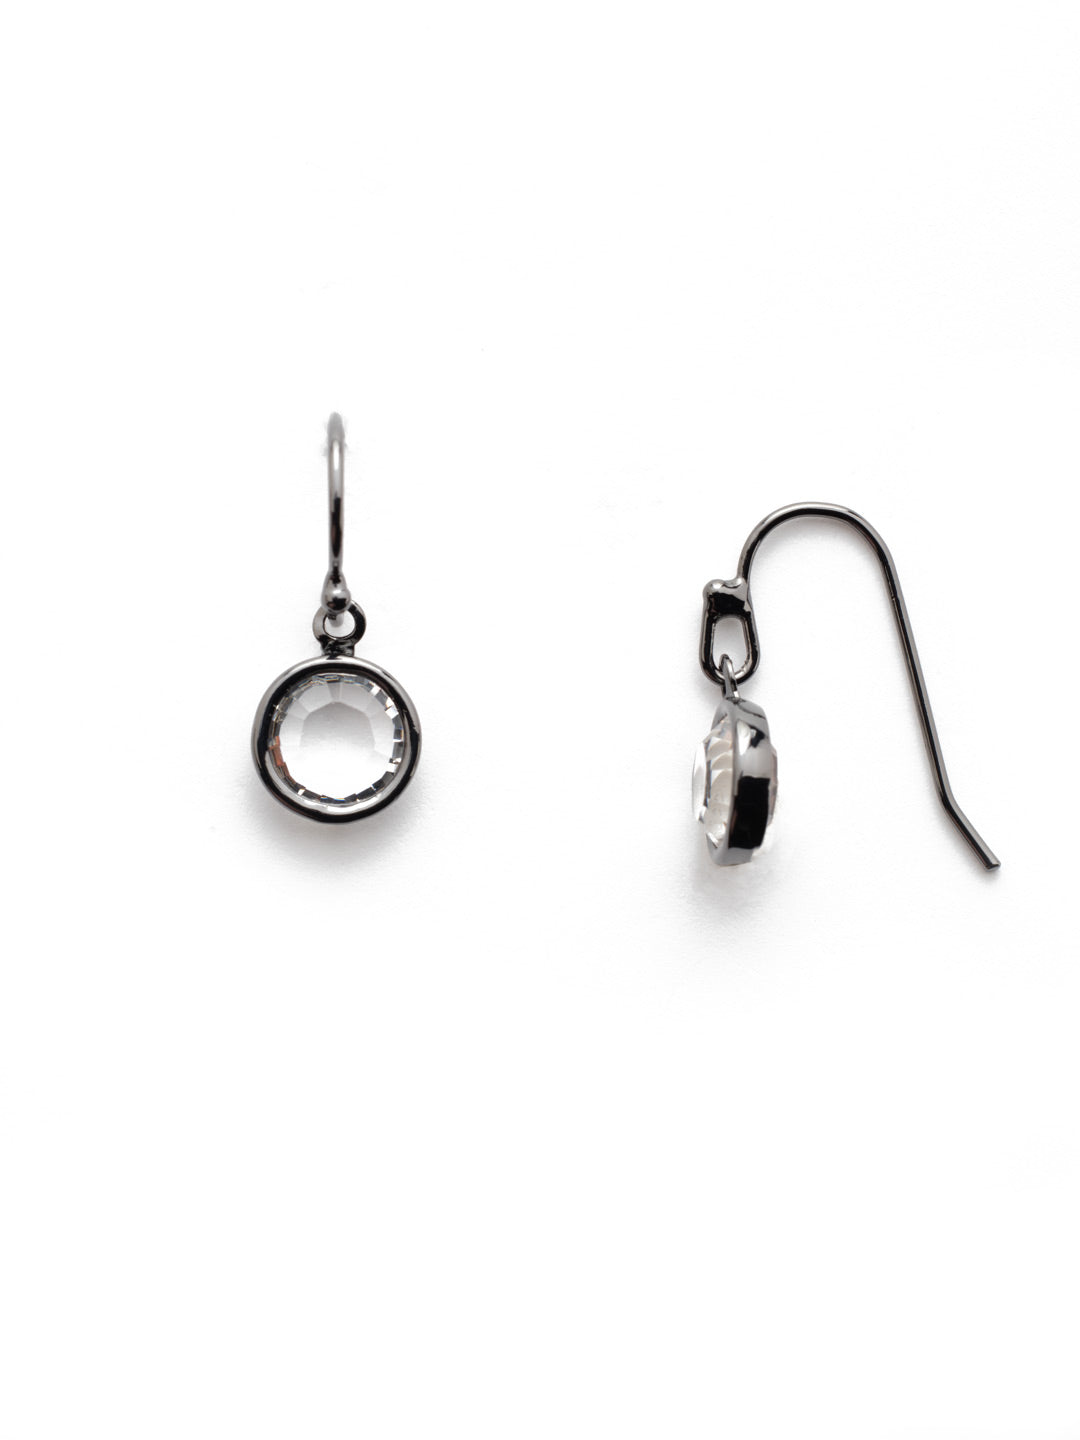 Dewdrop Dangle Earring - EEF73GMGNS - A drop of sparkle is always in style. Add a touch with this pair of drop earrings. From Sorrelli's Golden Shadow collection in our Gun Metal finish.